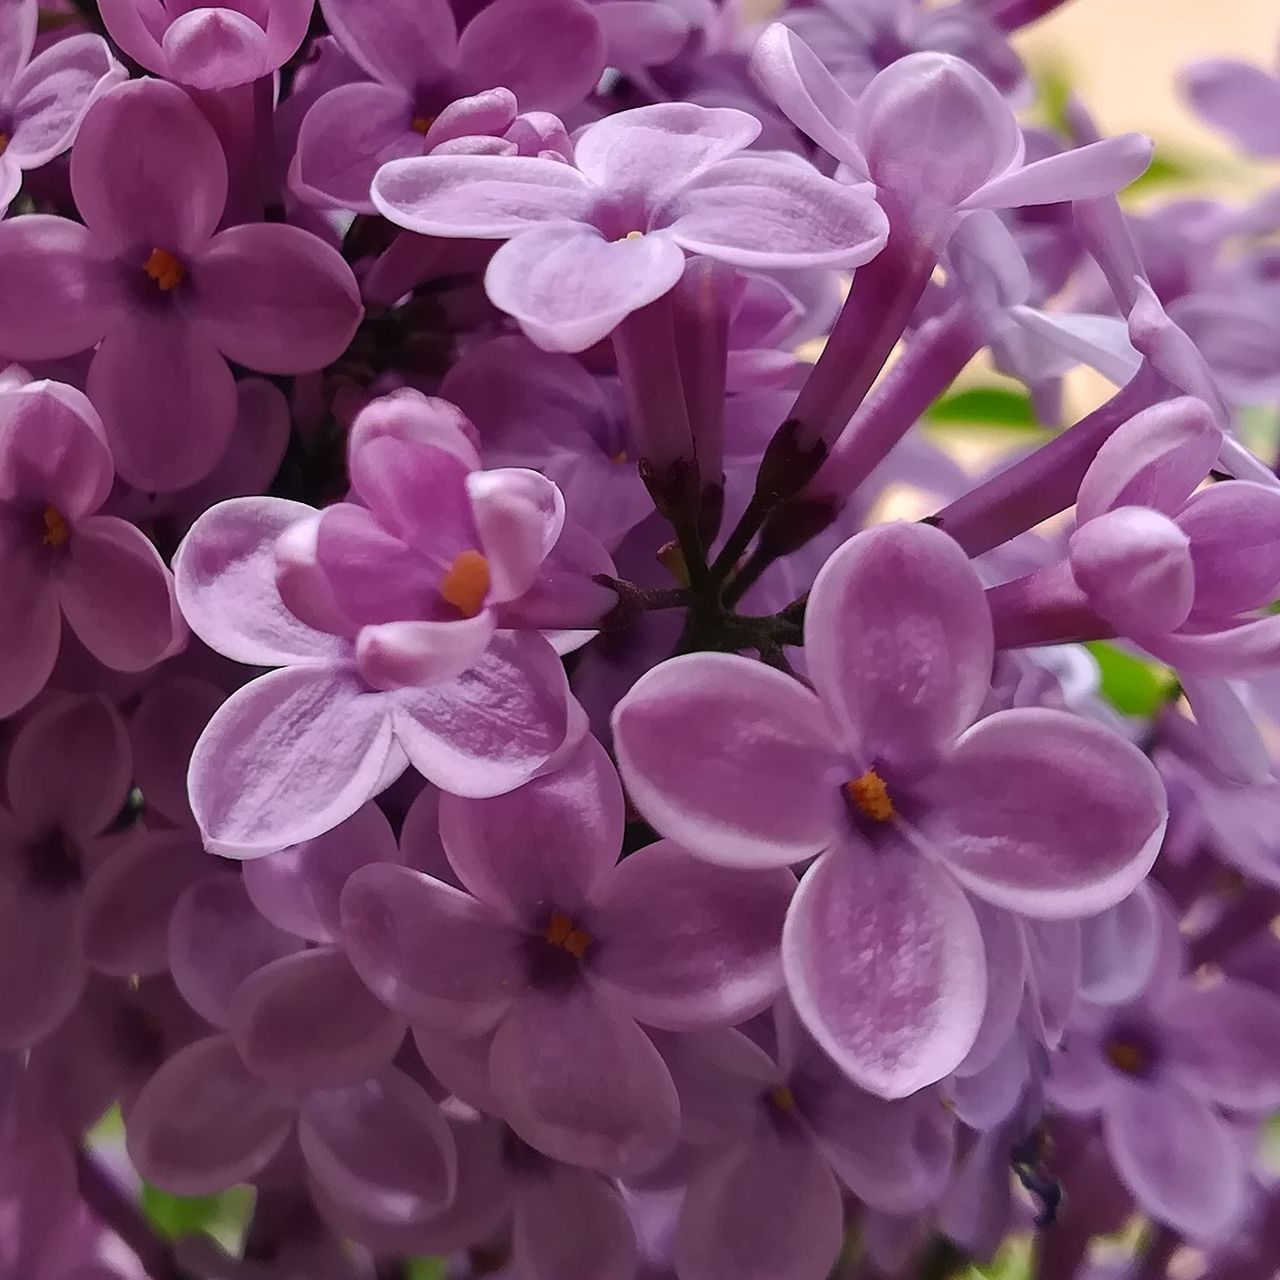 flowering plant, flower, vulnerability, petal, fragility, plant, beauty in nature, freshness, close-up, inflorescence, flower head, growth, nature, no people, botany, purple, day, full frame, focus on foreground, pollen, bunch of flowers, lilac